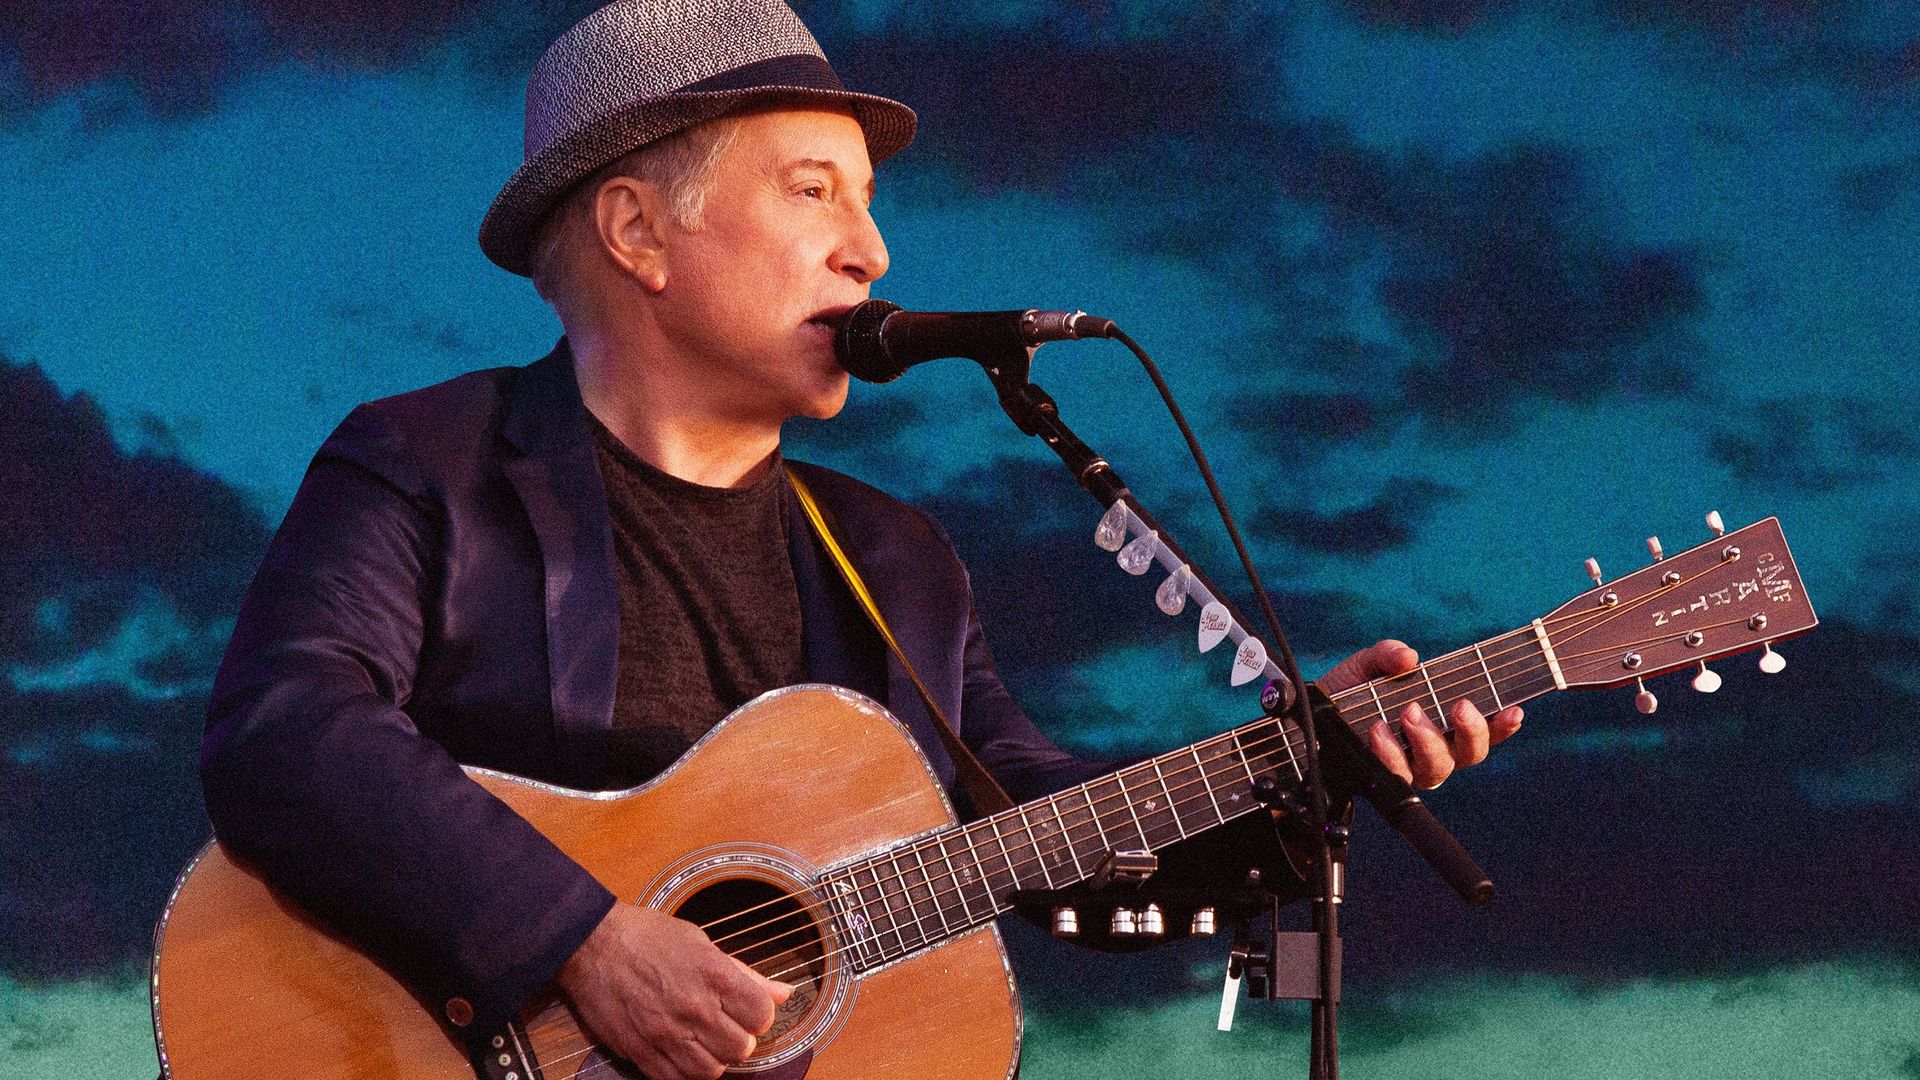 Paul Simon: The Concert in Hyde Park background